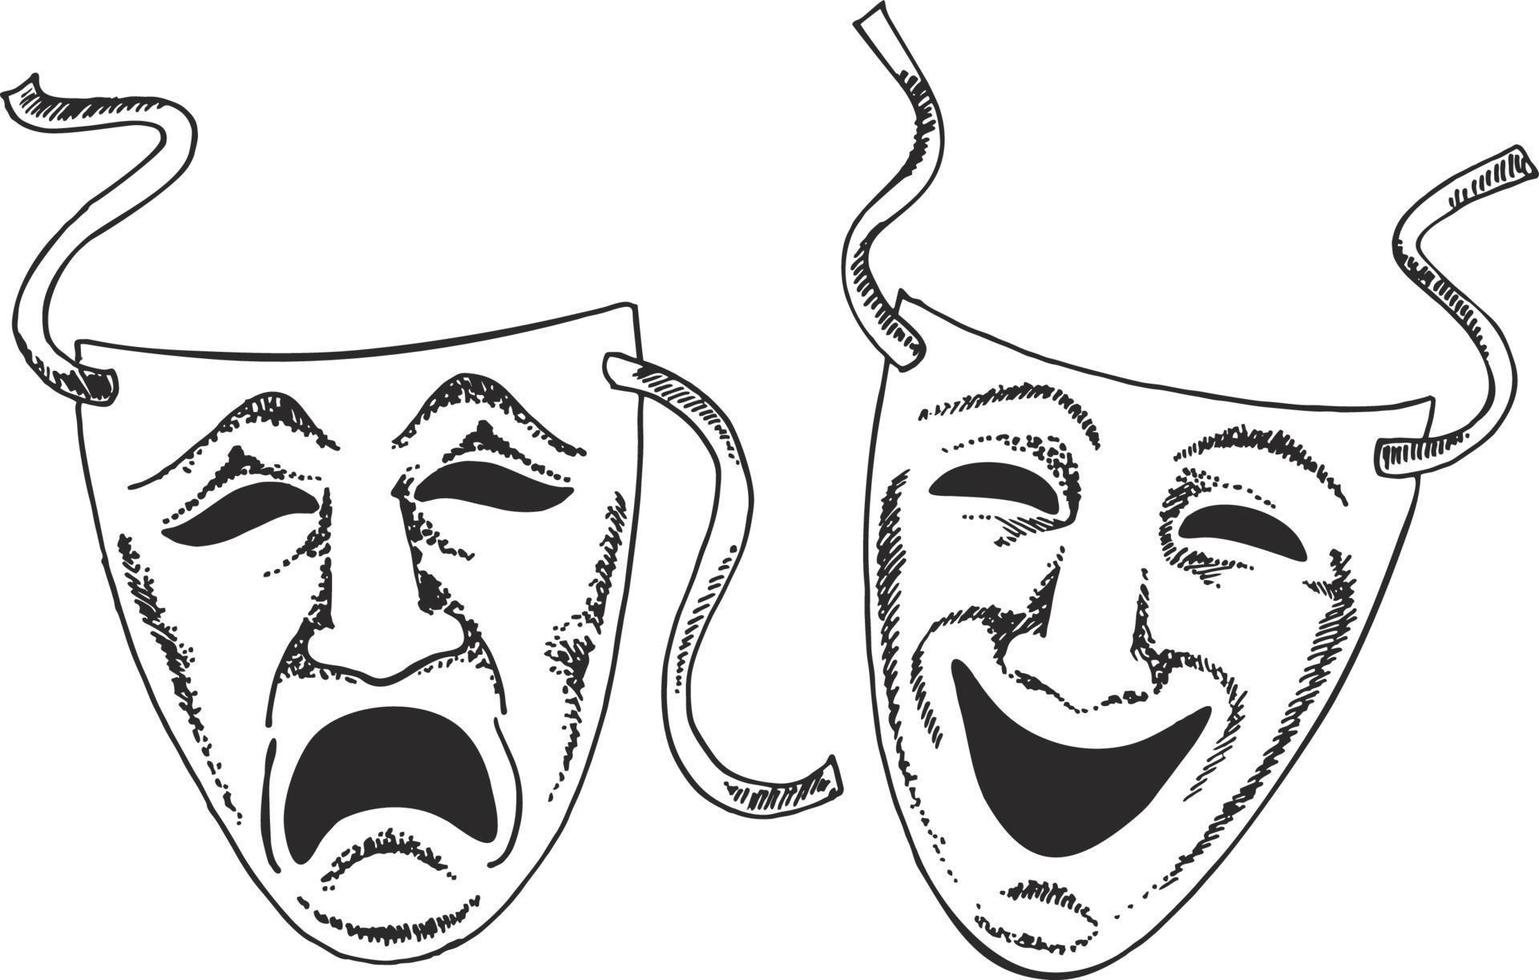 Sketch style drama or theater masks illustration in vector format suitable for web, print, or advertising use